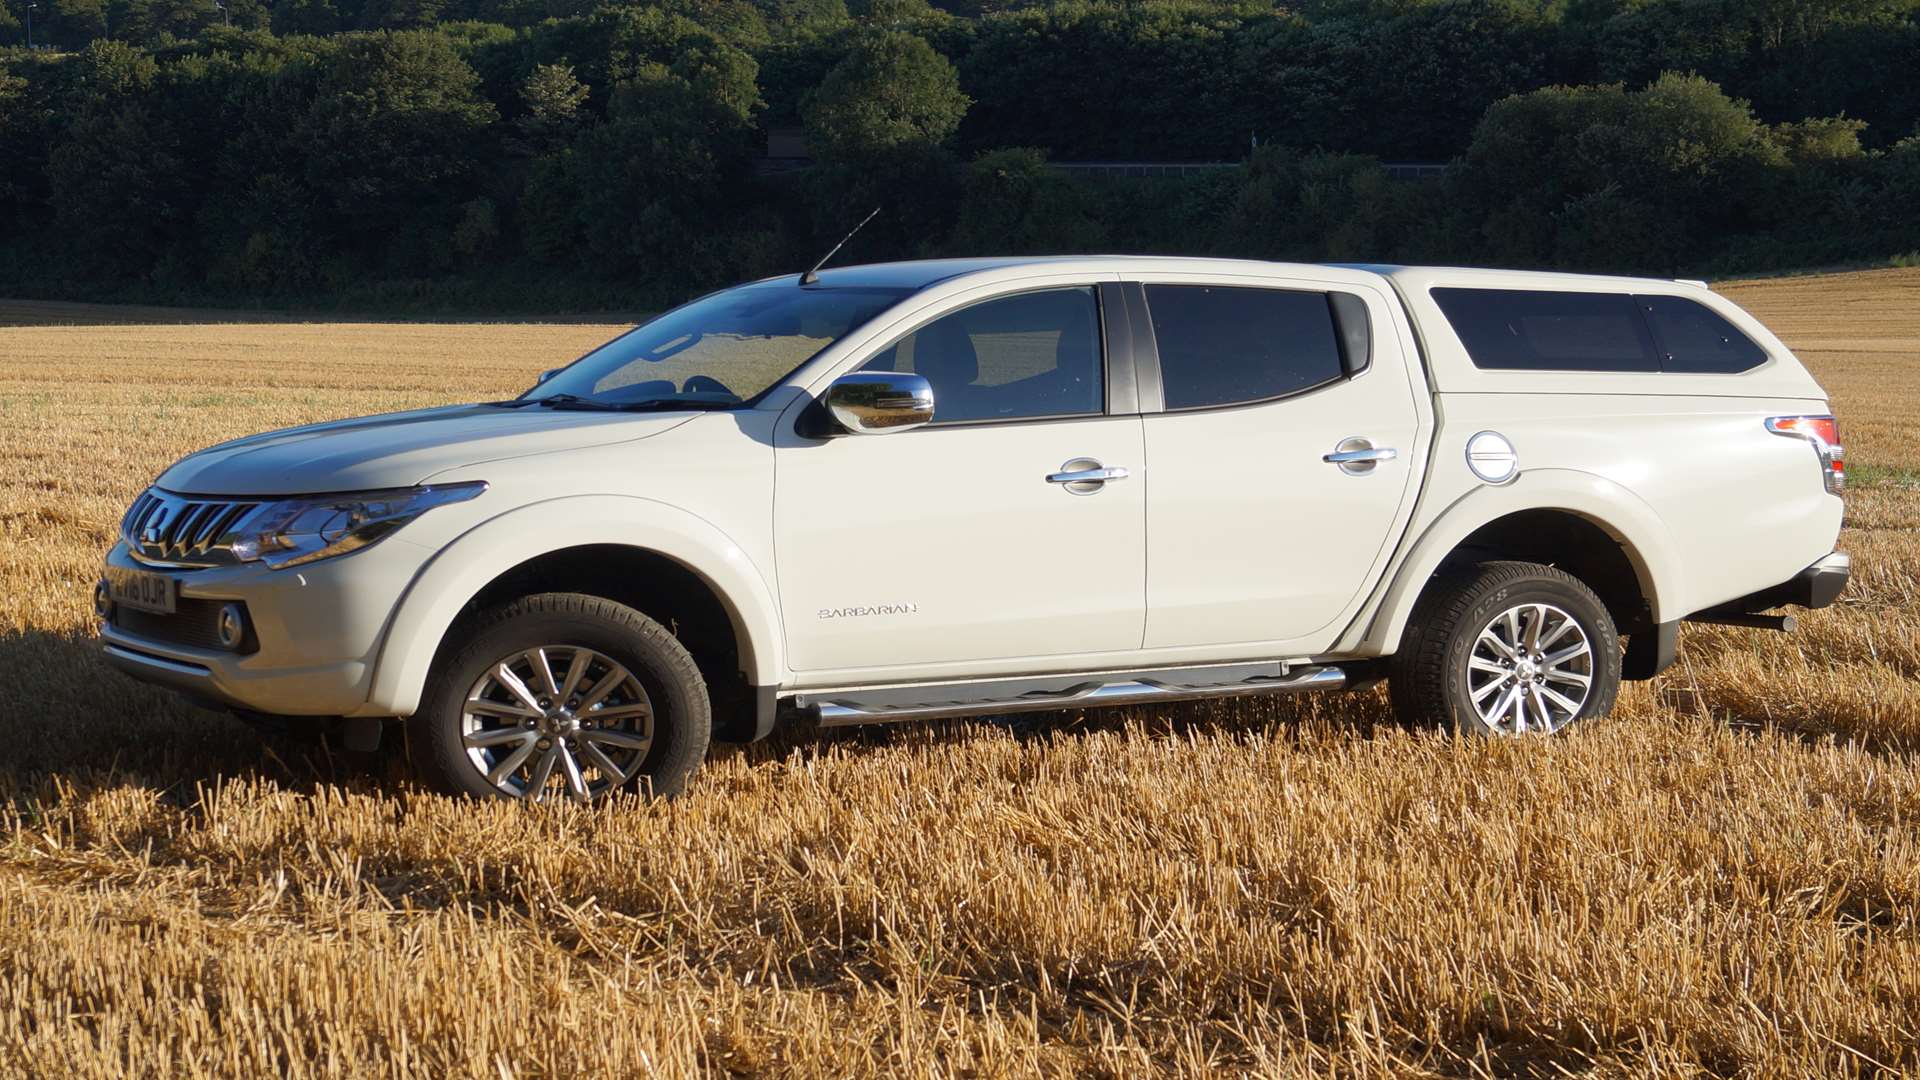 The L200 is rugged, robust and also remarkably civilised